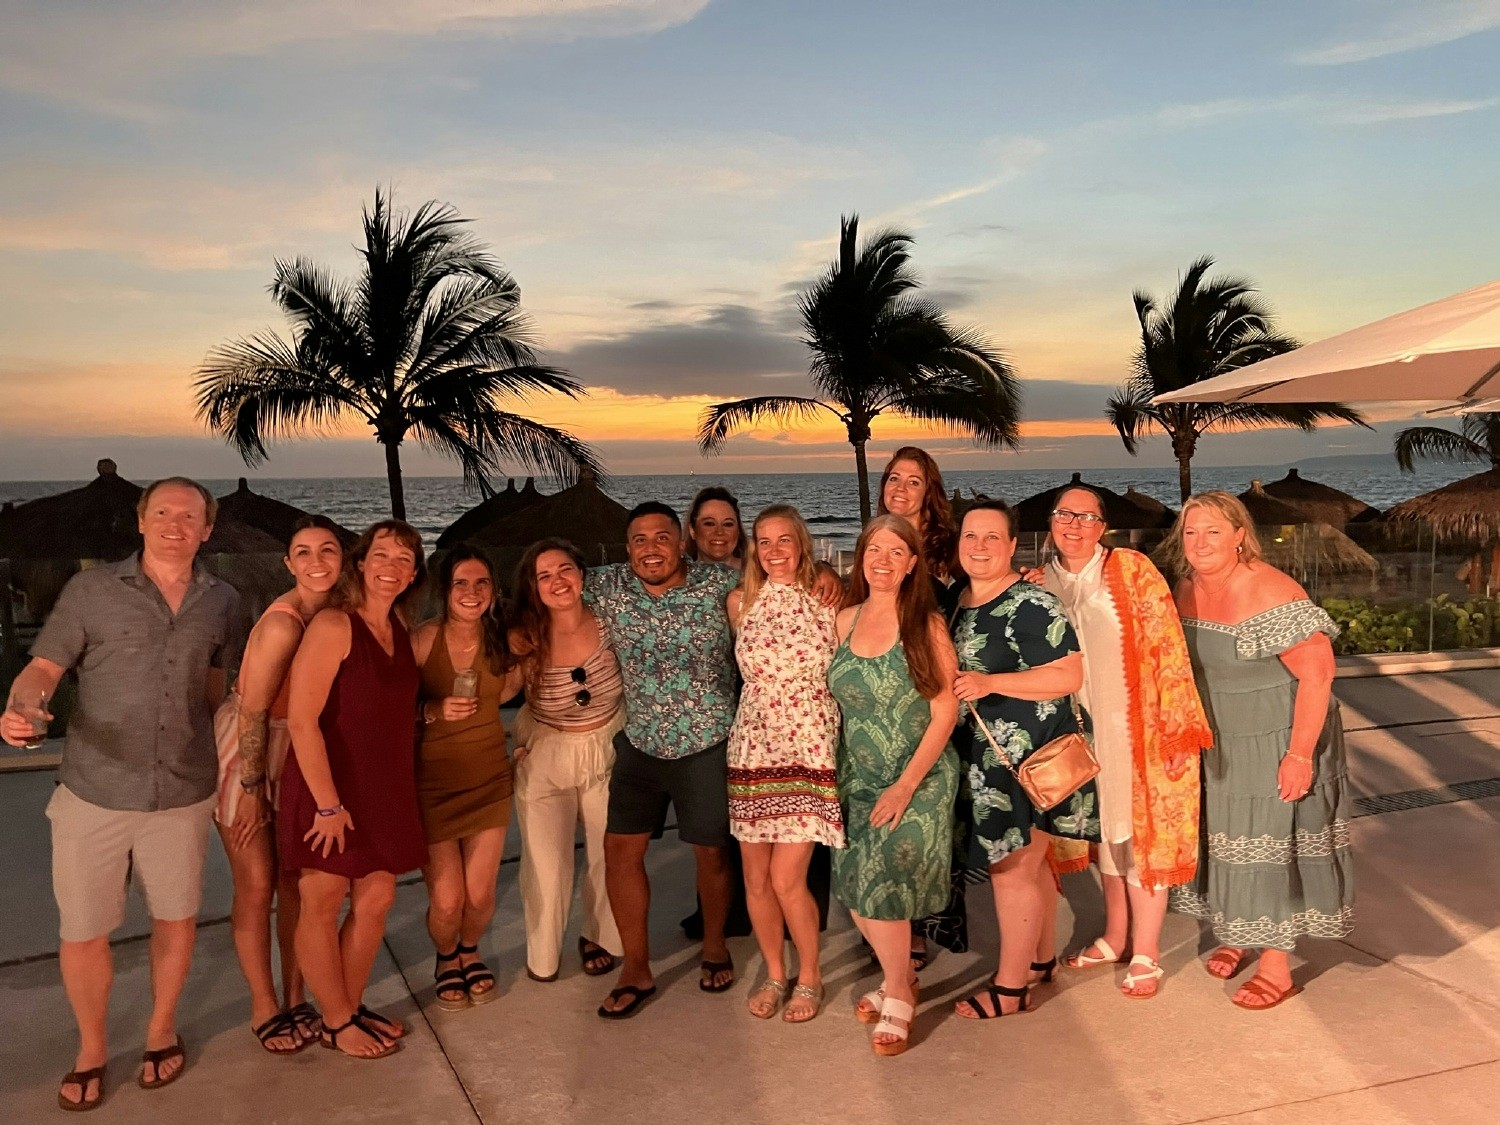 Producers' Club members (Top salespeople) on company trip in Puerto Vallarta, Mexico in April 2023.